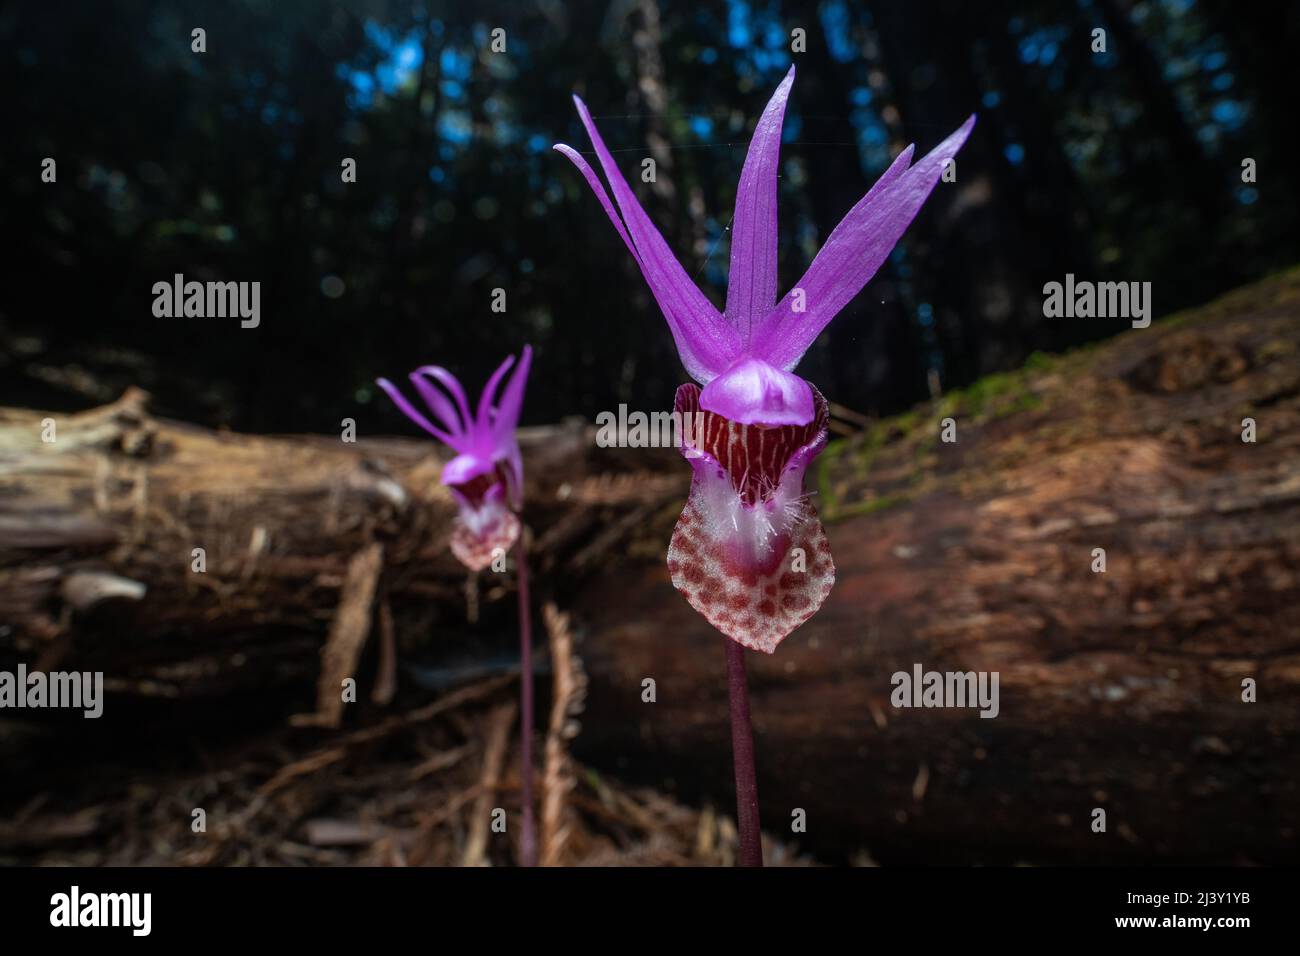 Fairy Slipper orchid (Calypso bulbosa) growing, blooming and flowering on the redwood forest floor in Northern California, North America. Stock Photo